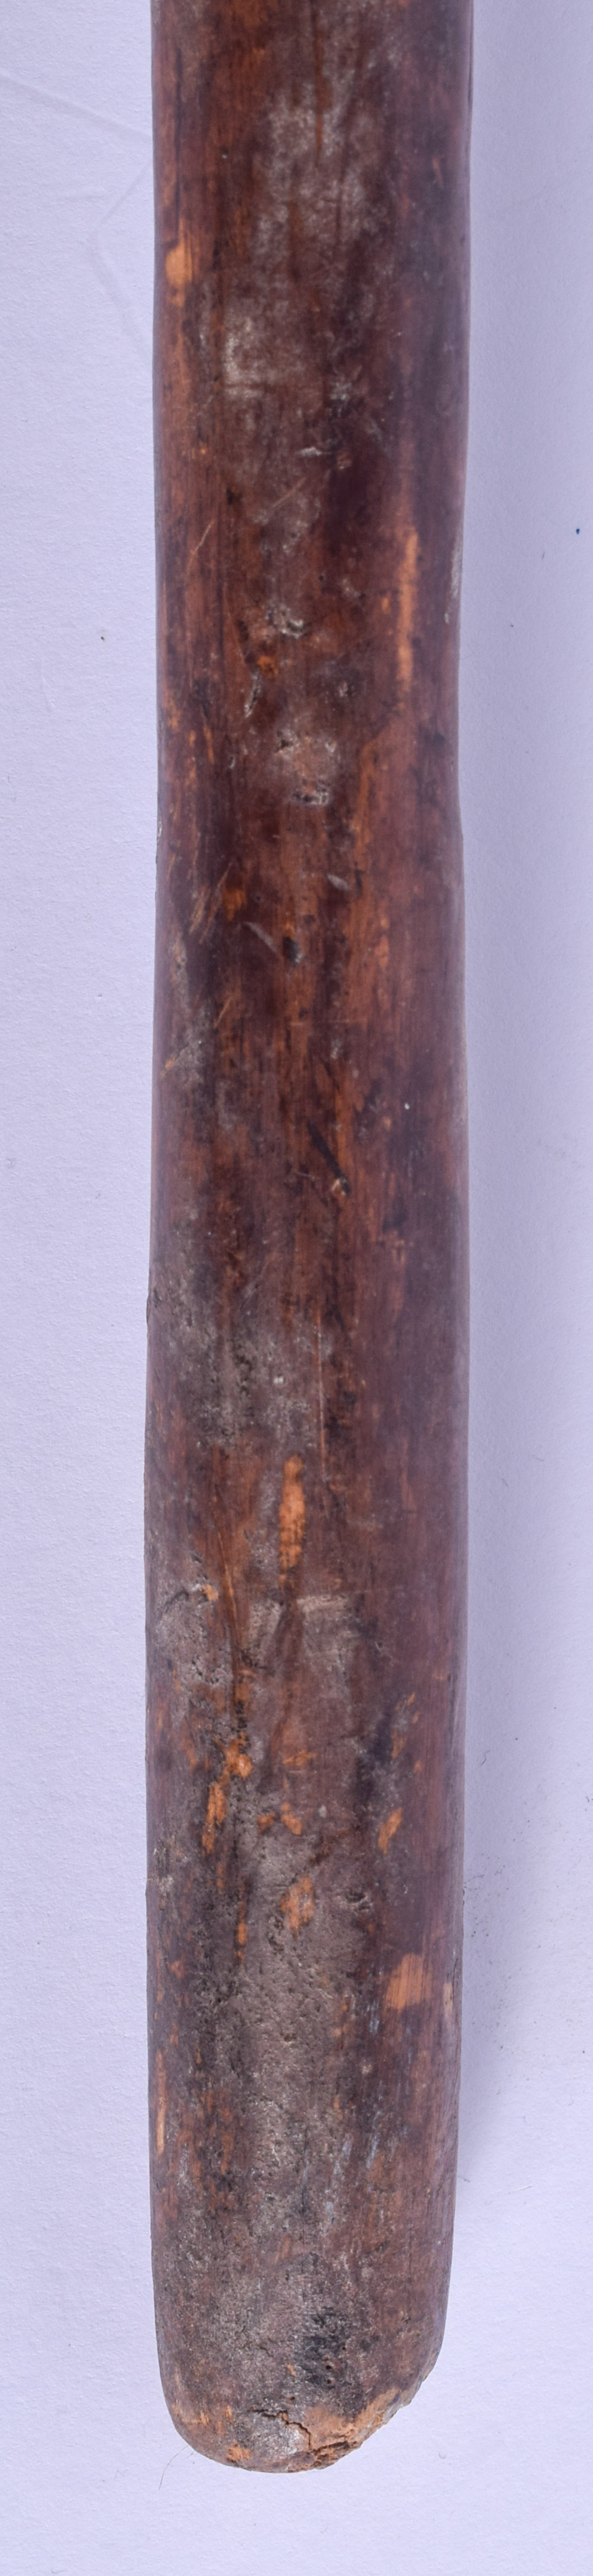 A 19TH CENTURY TRIBAL CARVED HARDWOOD KNOBKERRIE probably Polynesian. 72 cm long. - Image 4 of 5